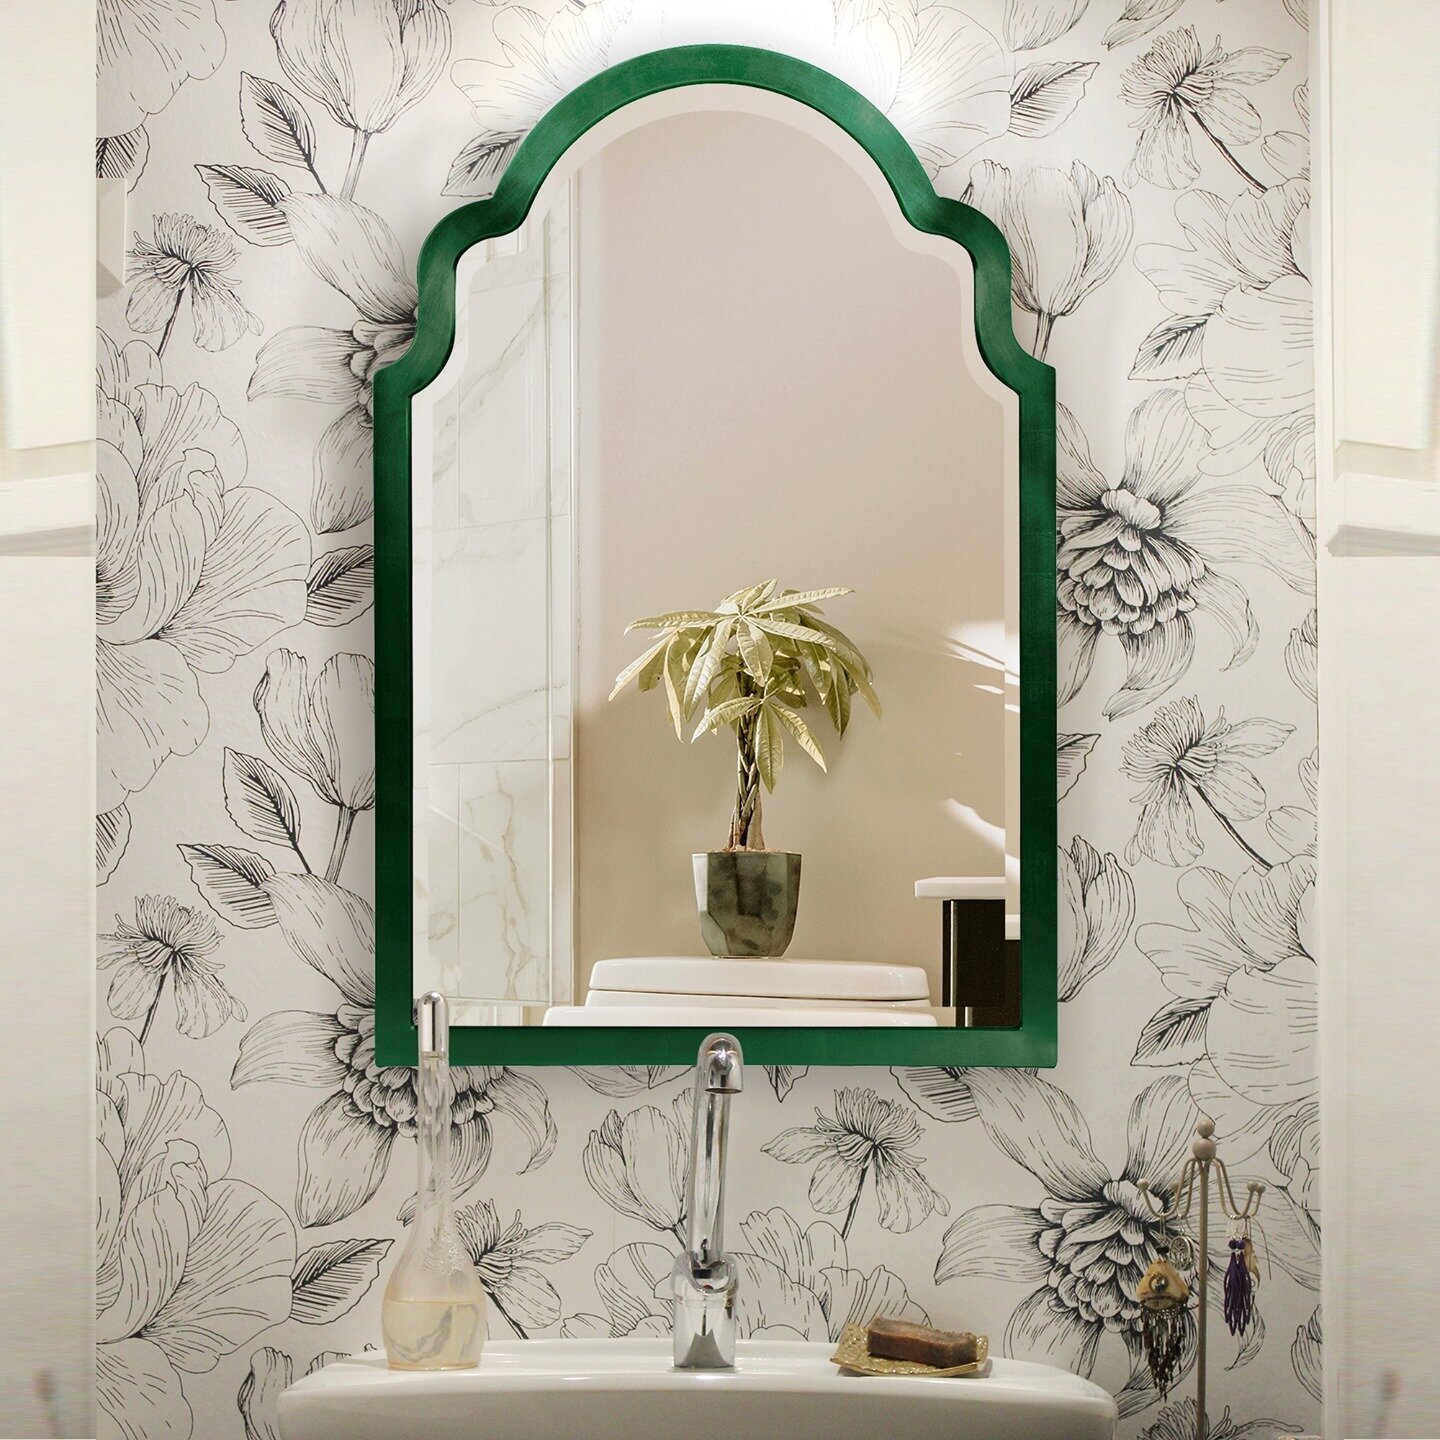 Giving you the Green Light to have fun with your decor!

Green promotes growth and relaxation. There are many ways to add green to your decor. Including with your Mirror!

The Sultan Mirror is a gorgeous piece. The wood frame is shaped like a fancy a